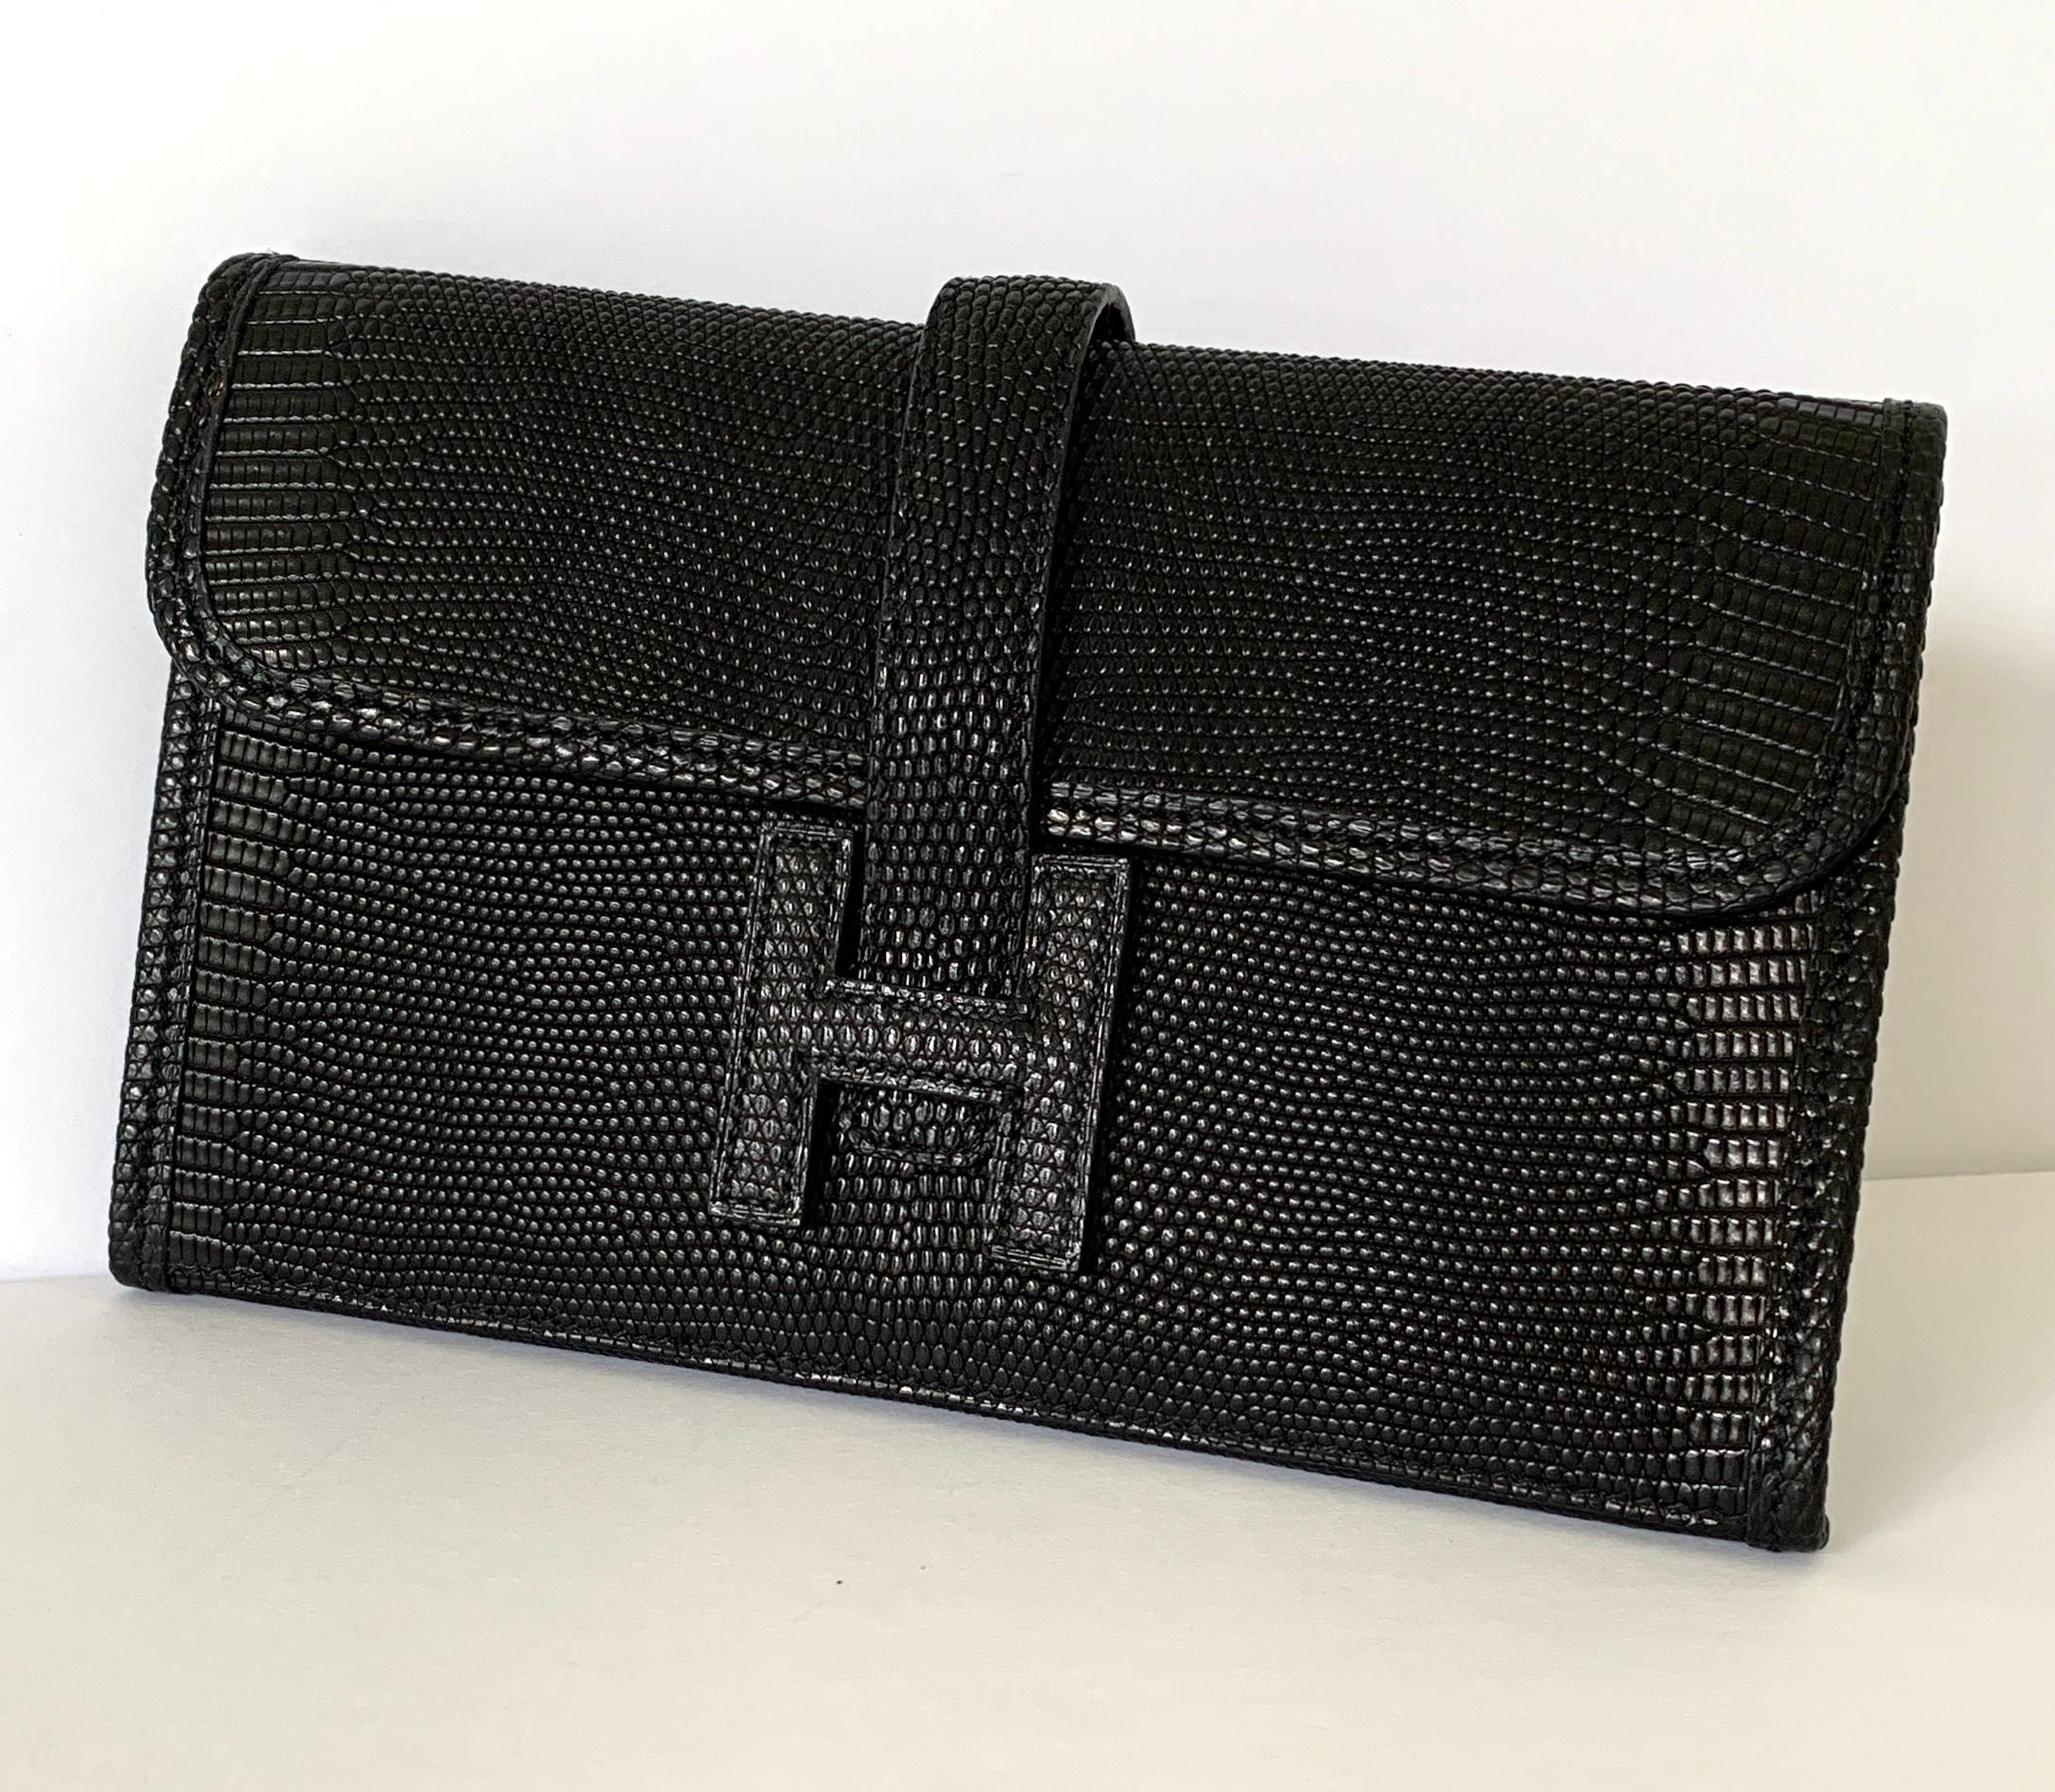 LIZARD MINI MINI JIGE CLUTCH
BLACK
SO RARE!
 

Black lizard Hermès Mini Mini Jige clutch

H Closure detail at front,
Lambskin lining
H Closure at front, pull through
Includes Hermes Box and  dust bag.

From 2014 Collection

Notice the beautiful